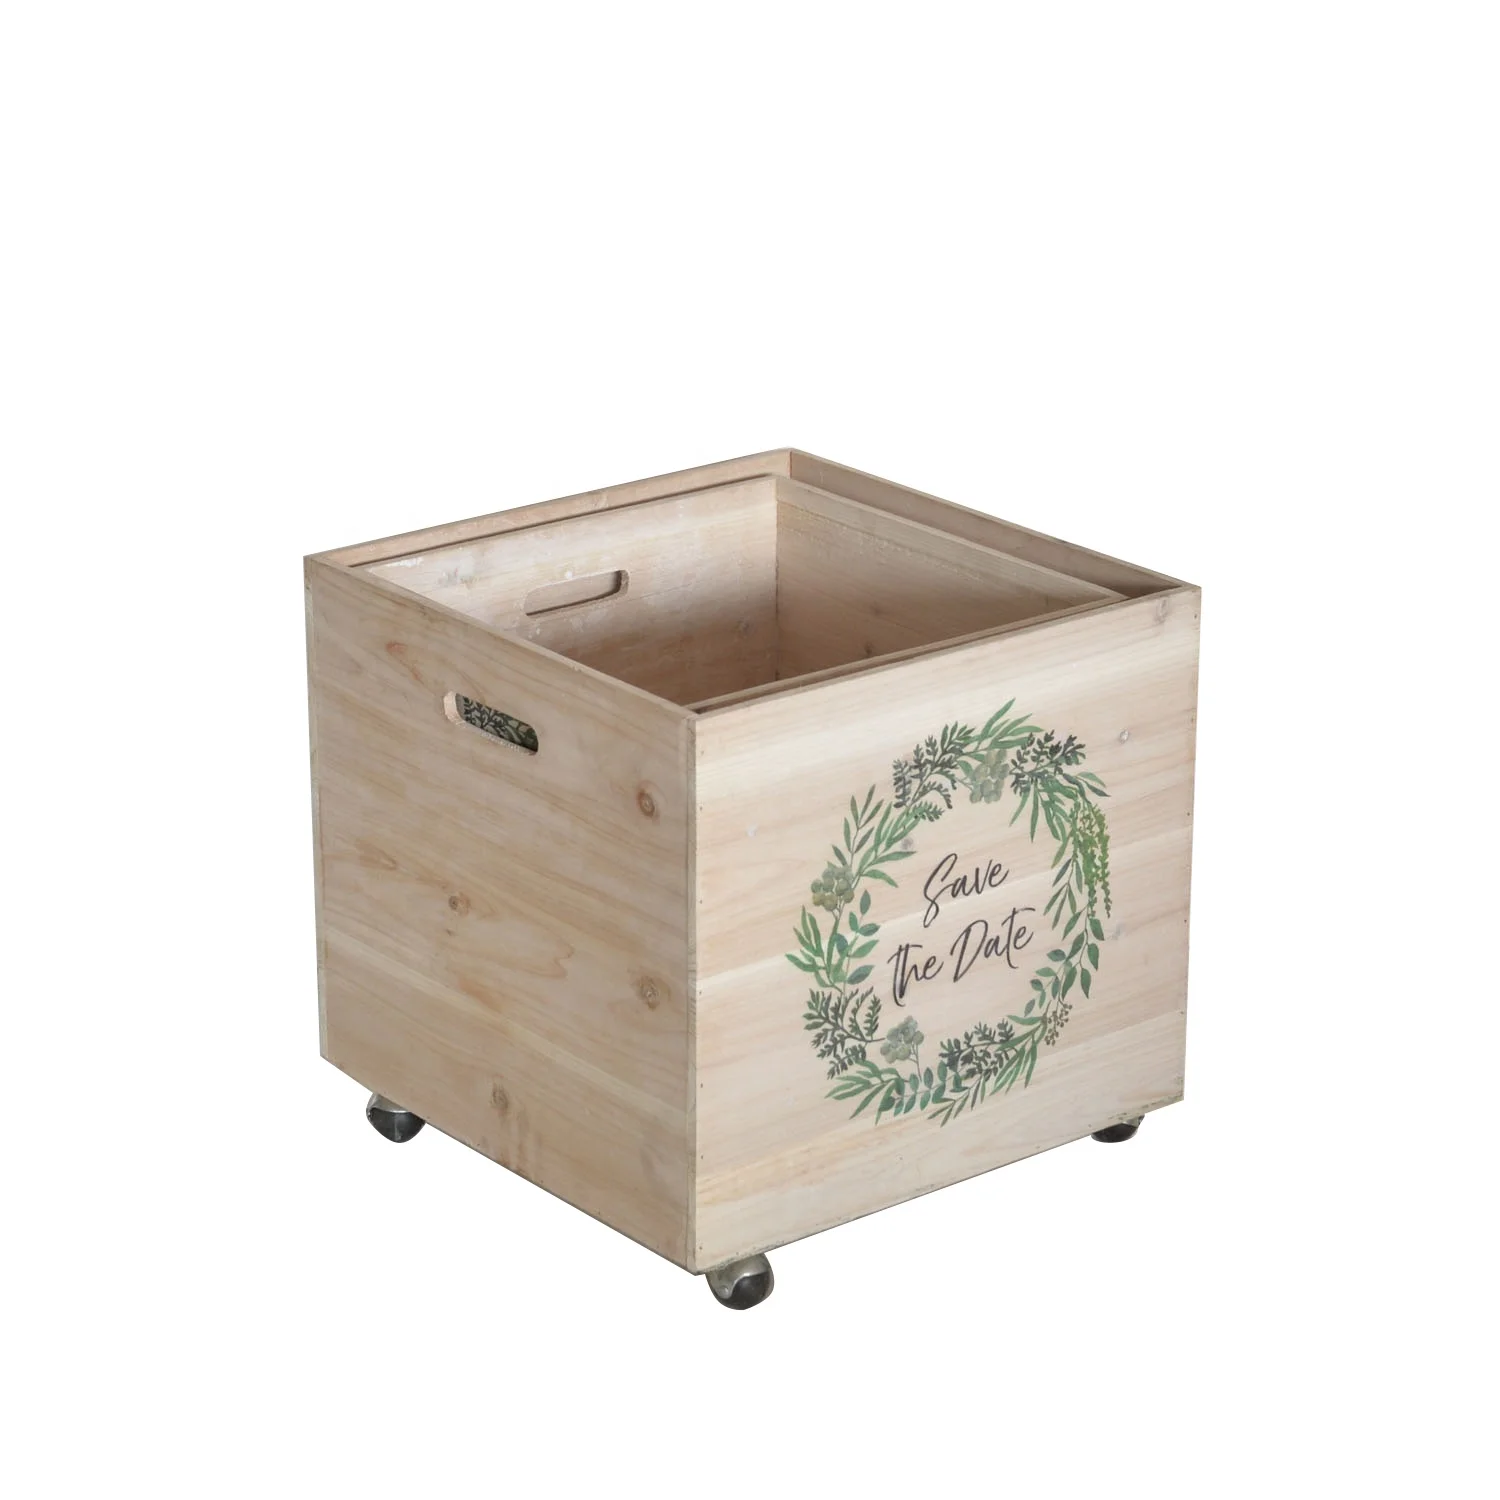 Magnetisch Arab Daarbij Mayco Home Cheap Decorative Wooden Storage Wine Box Crates With 4 Wheels -  Buy Wooden Storage Box,Wooden Storage Crates,Wooden Wine Box Product on  Alibaba.com